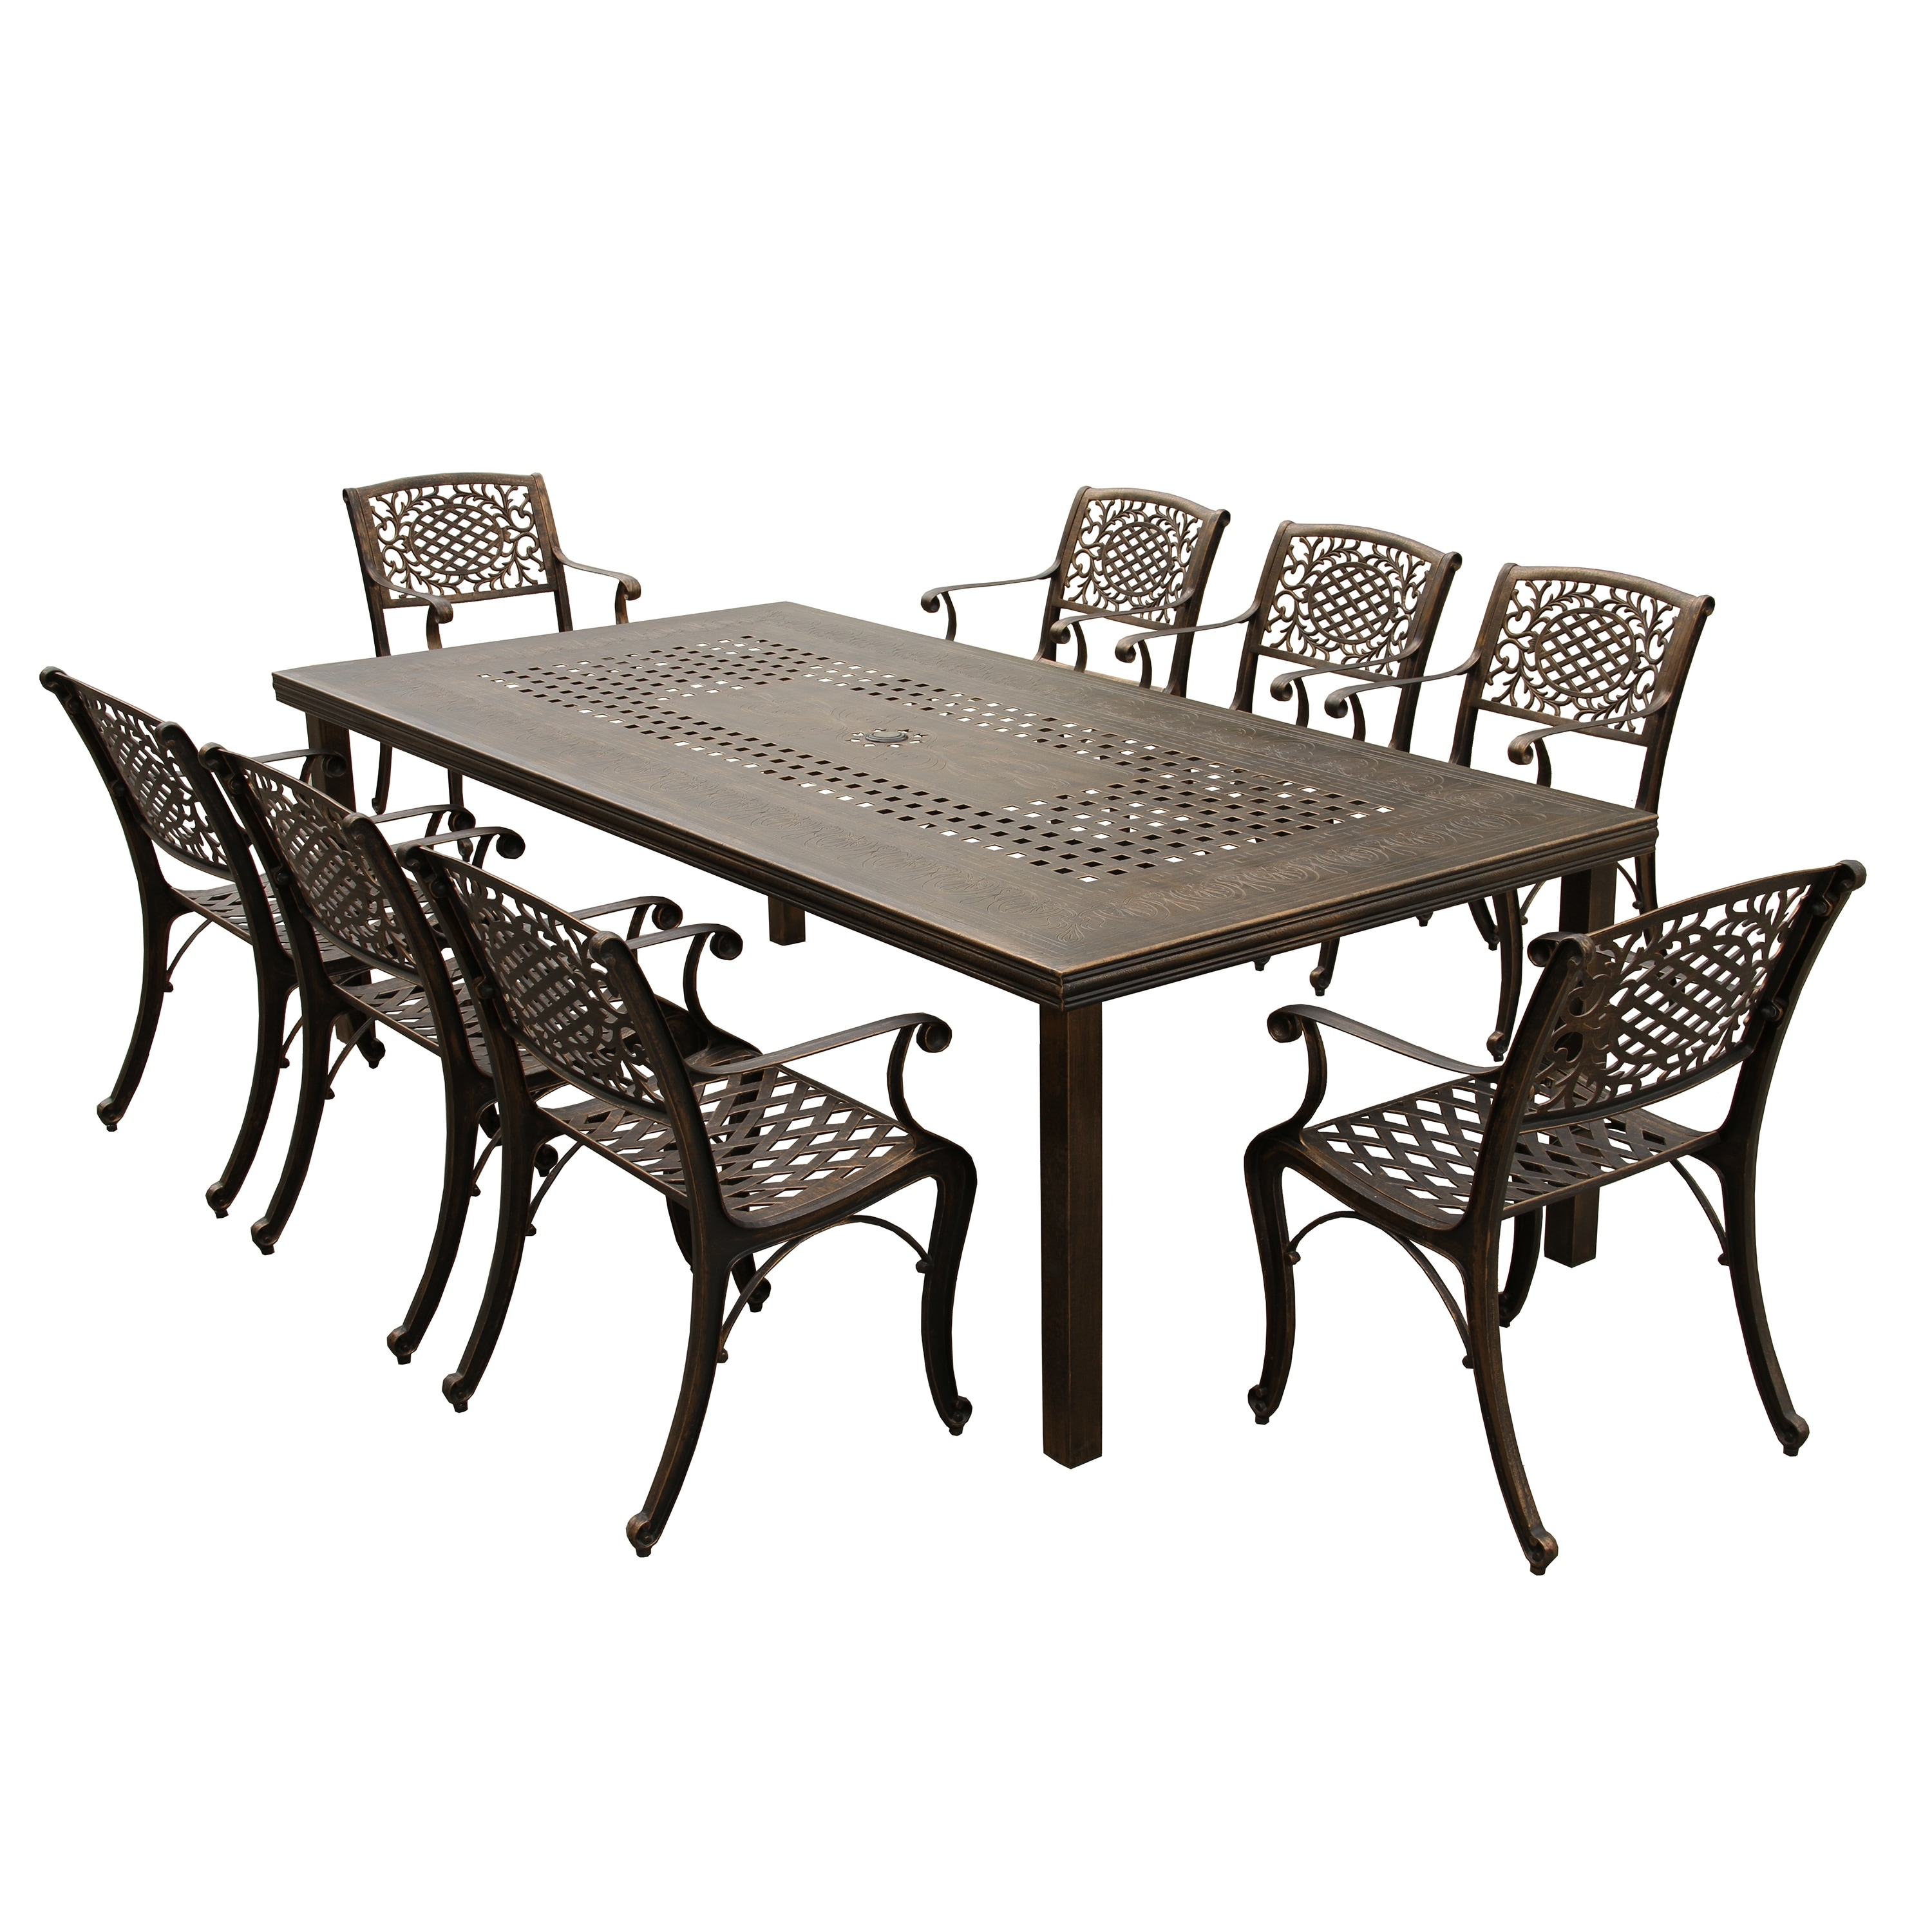 Modern Outdoor Mesh Lattice Aluminum 95-in Large Rectangular Patio Dining Set With Eight Arm Chairs - N/a